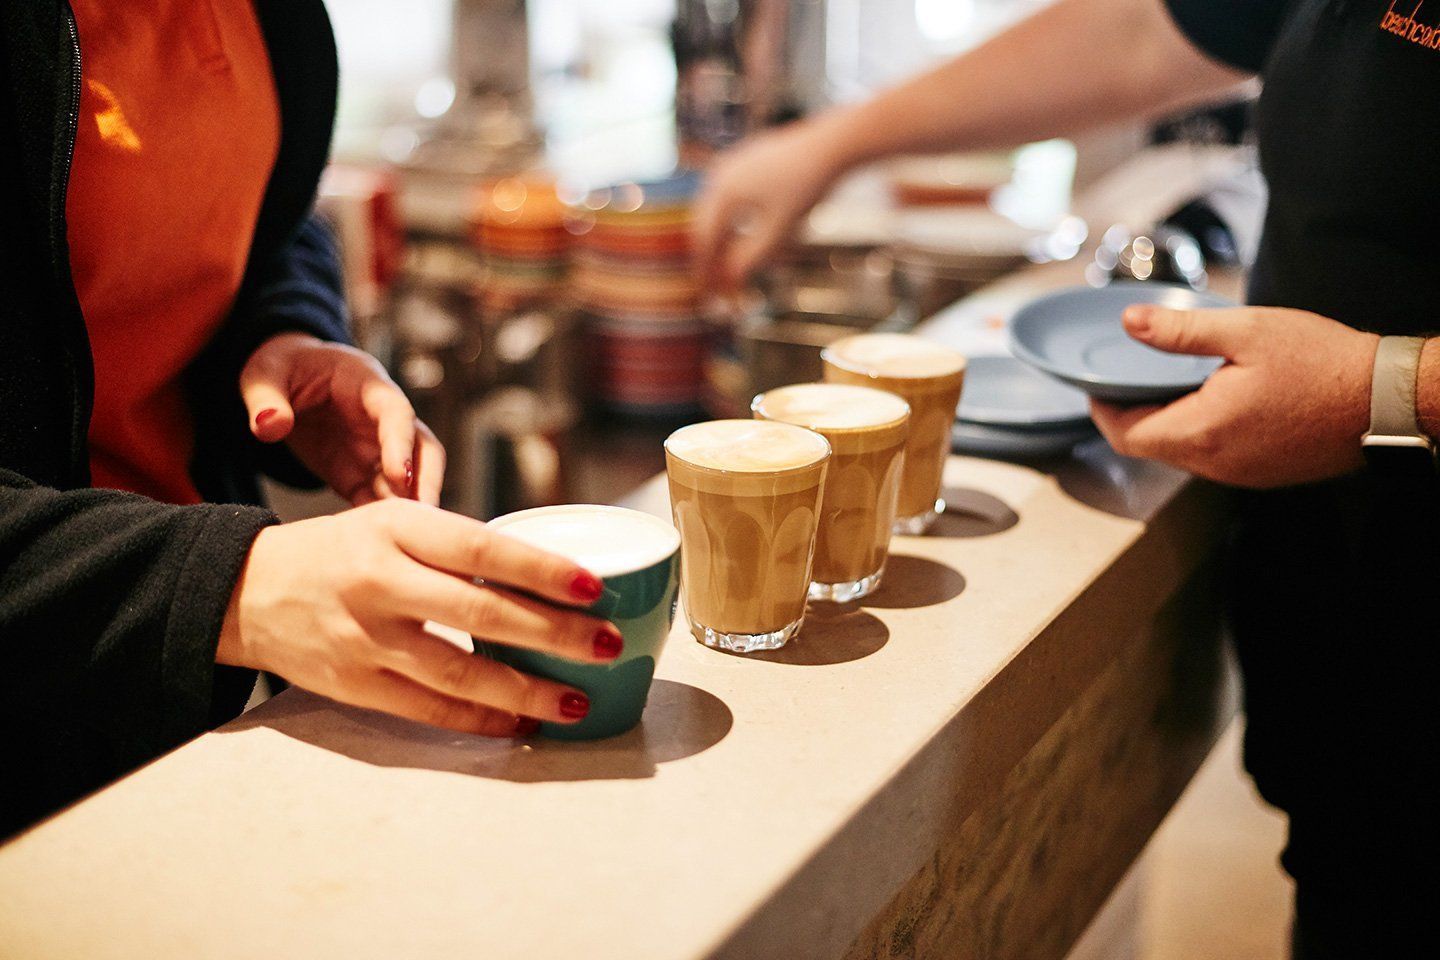 A woman is taking a cup of coffee from a barista.